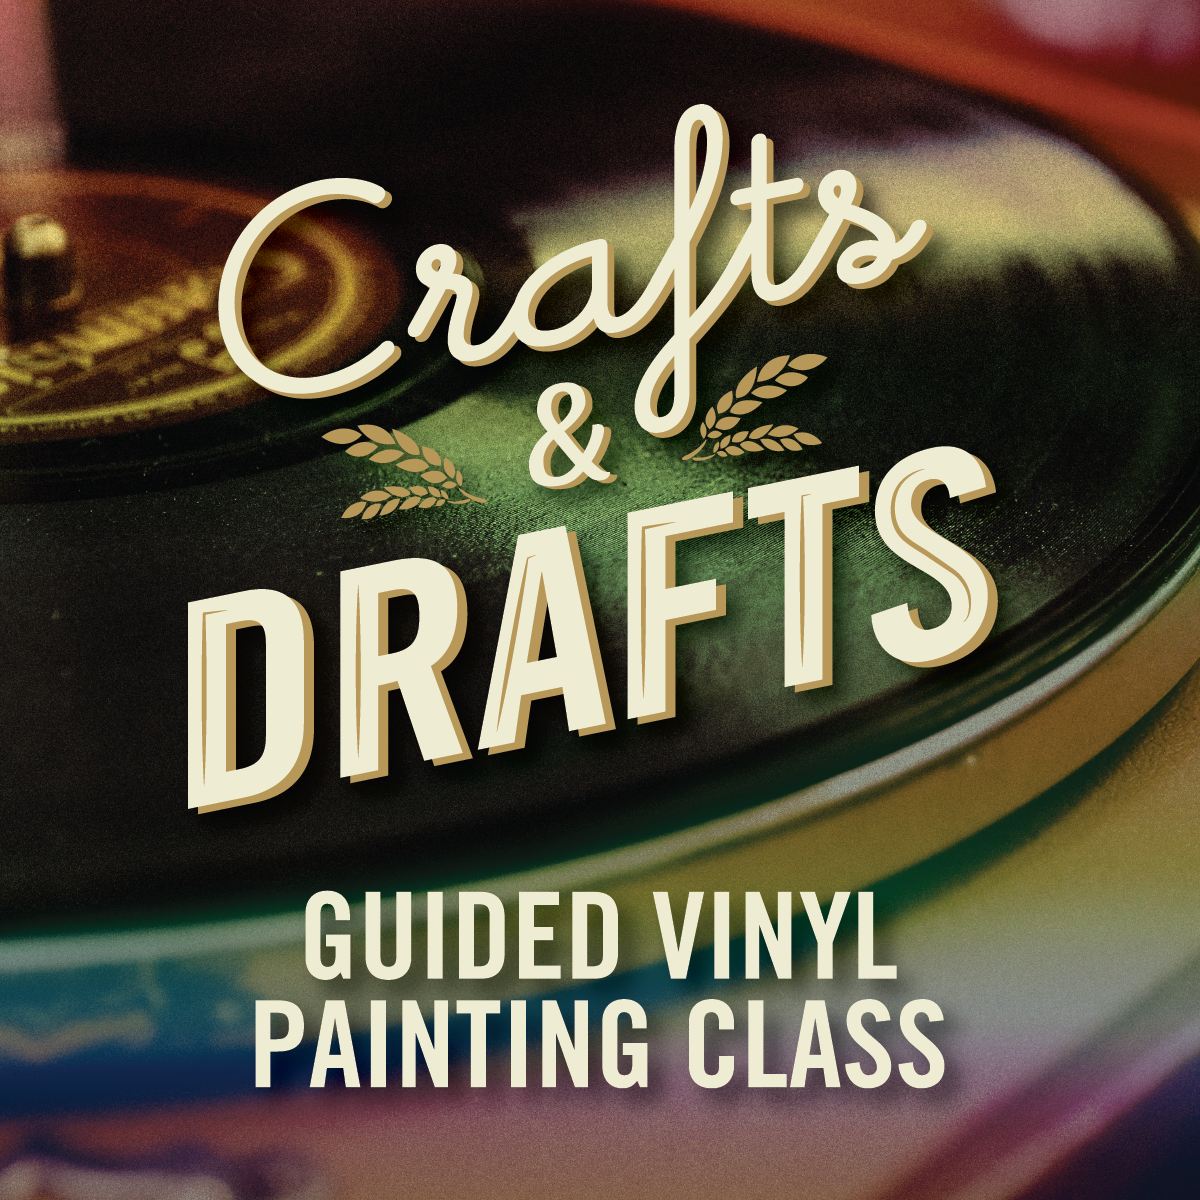 Crafts & Drafts - Guided Vinyl Painting